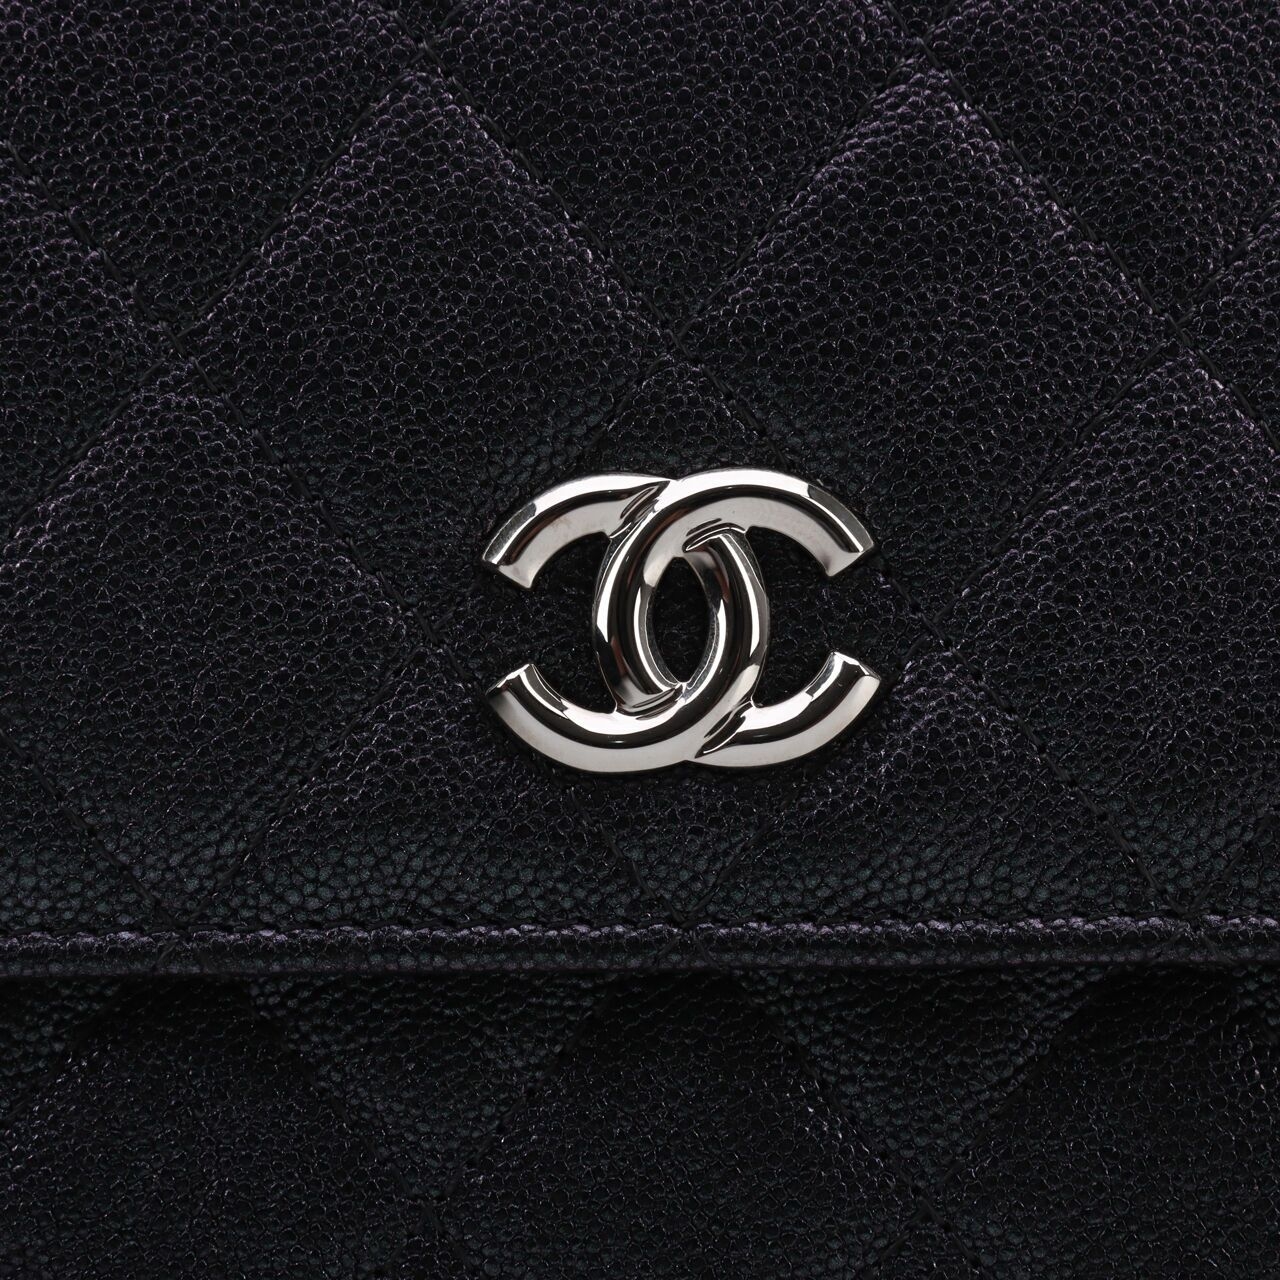 Chanel Iridescent Caviar Quilted Wallet On Chain Sling Bag